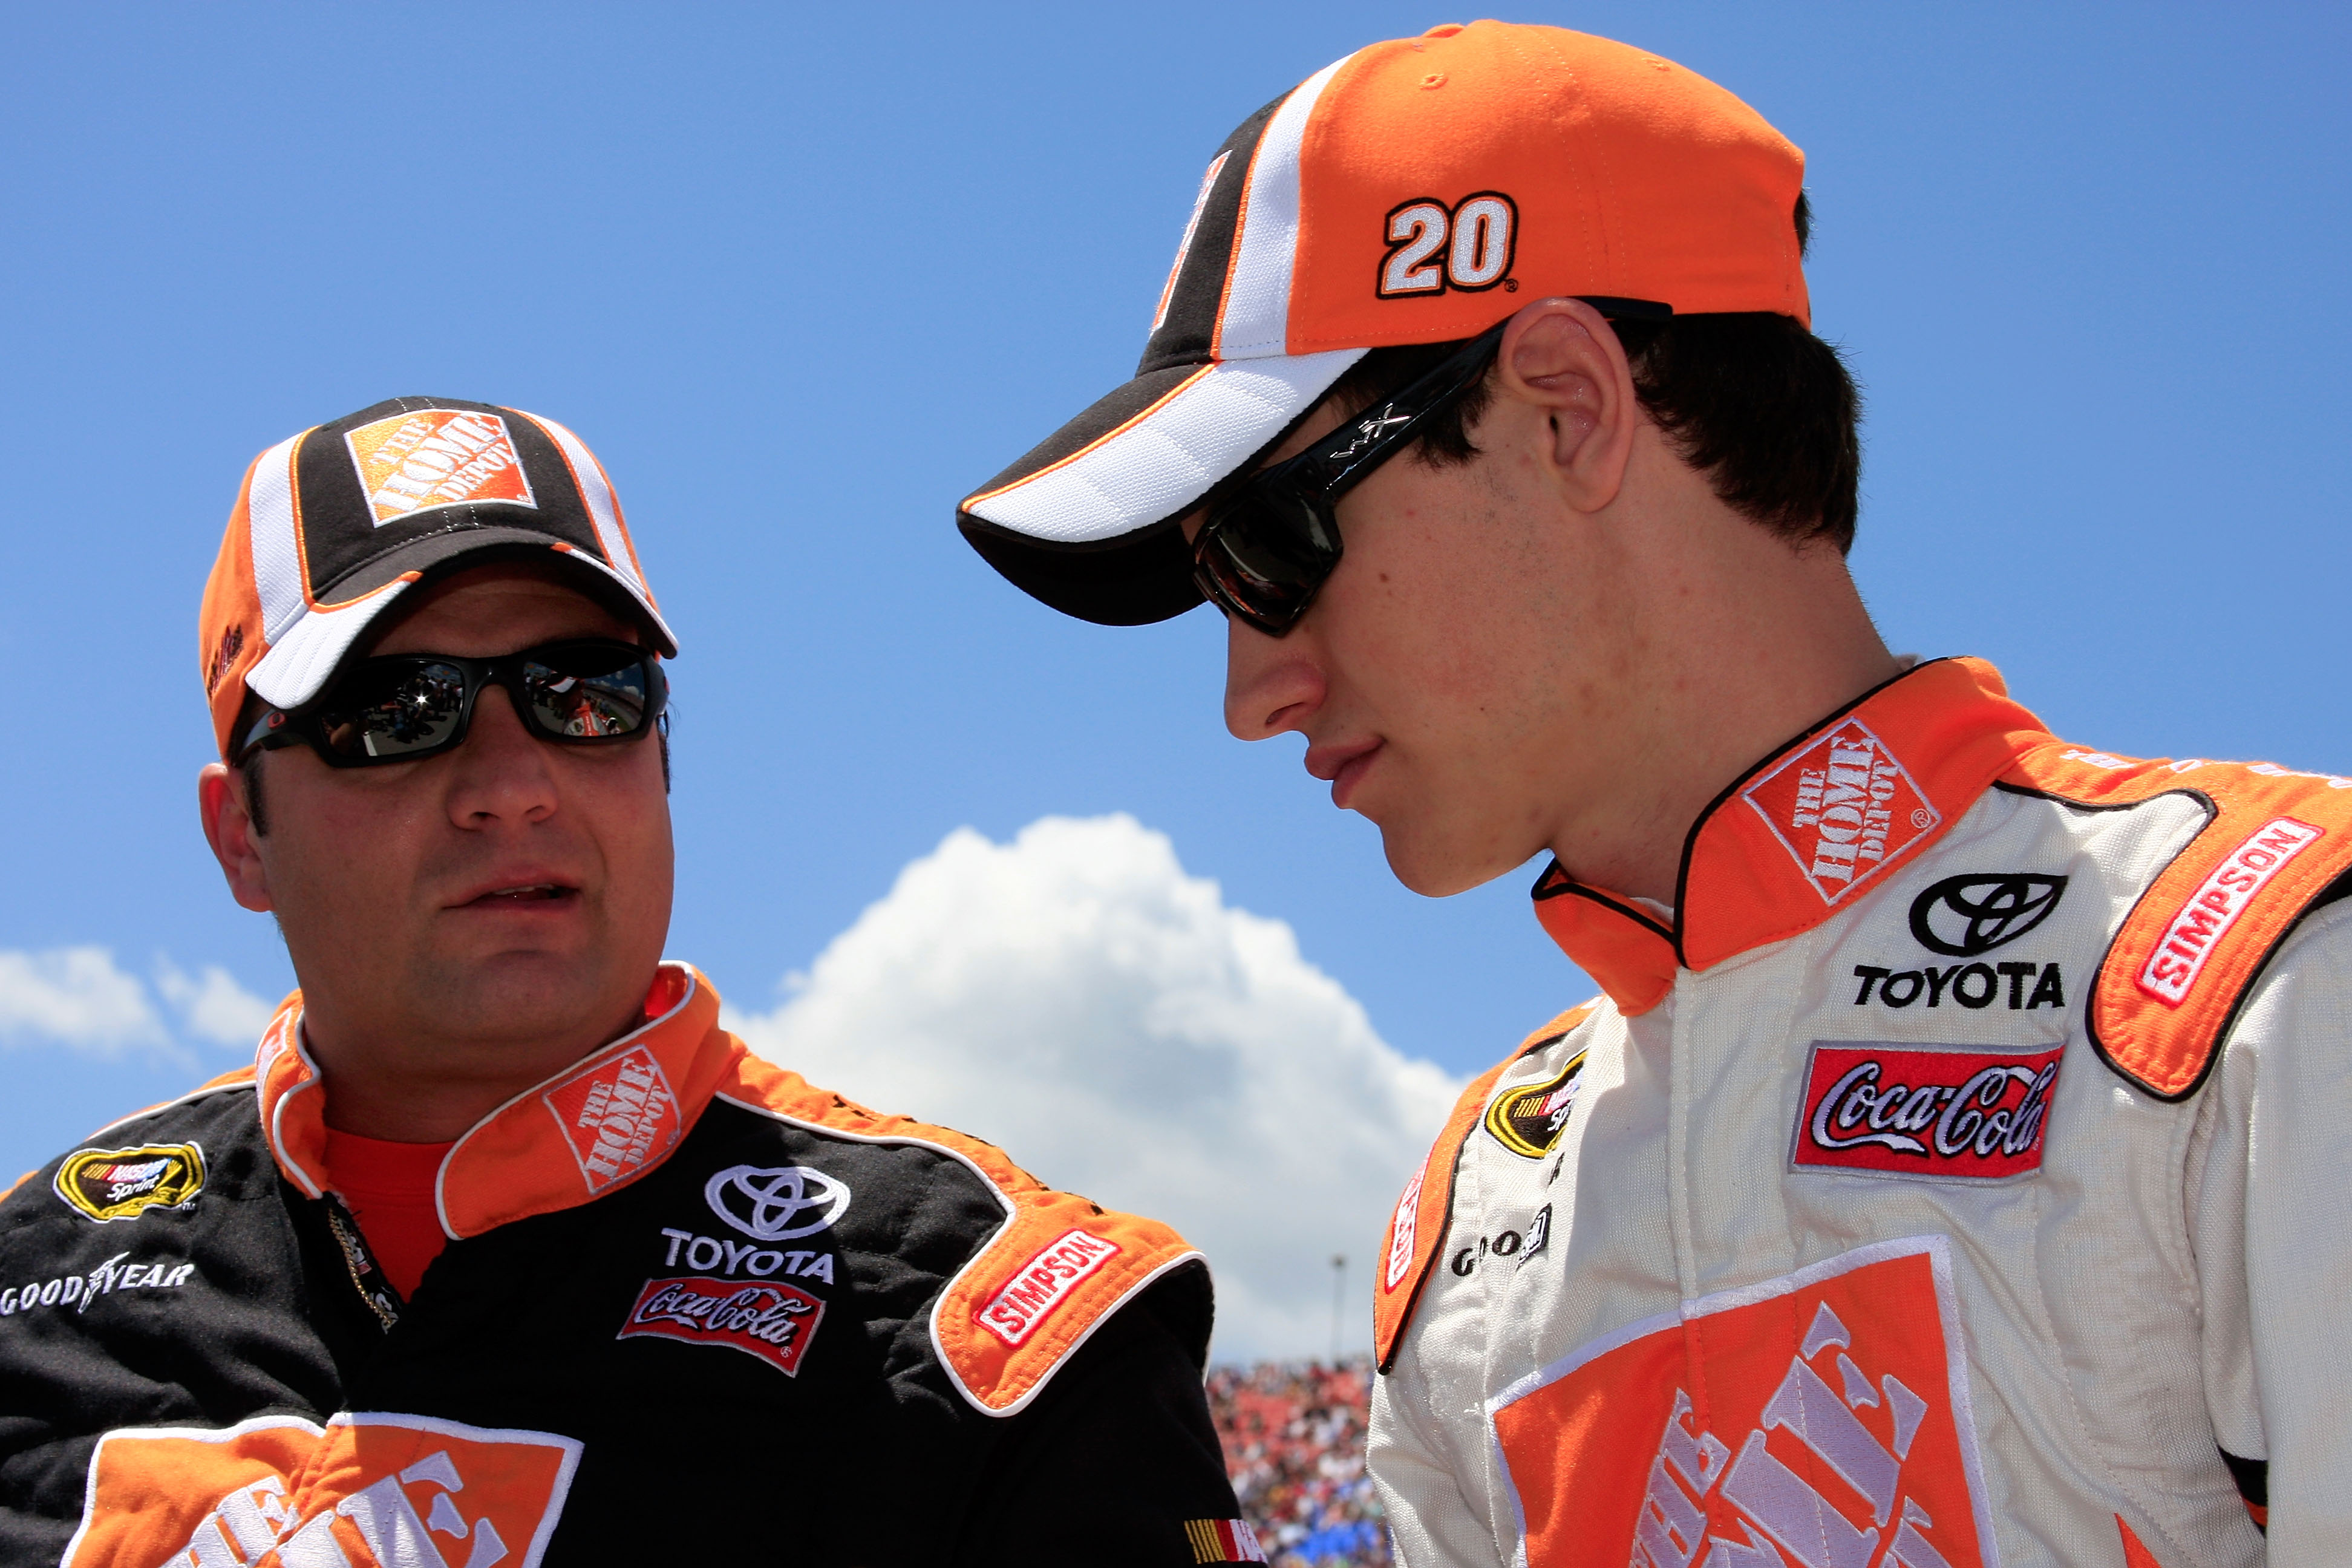 TALLADEGA, AL - APRIL 25:  Joey Logano (R), driver of the #20 Home Depot Toyota, talks with his crew chief Greg Zipadelli on the grid prior to thet start of the NASCAR Sprint Cup Series Aaron's 499 at Talladega Superspeedway on April 25, 2010 in Talladega